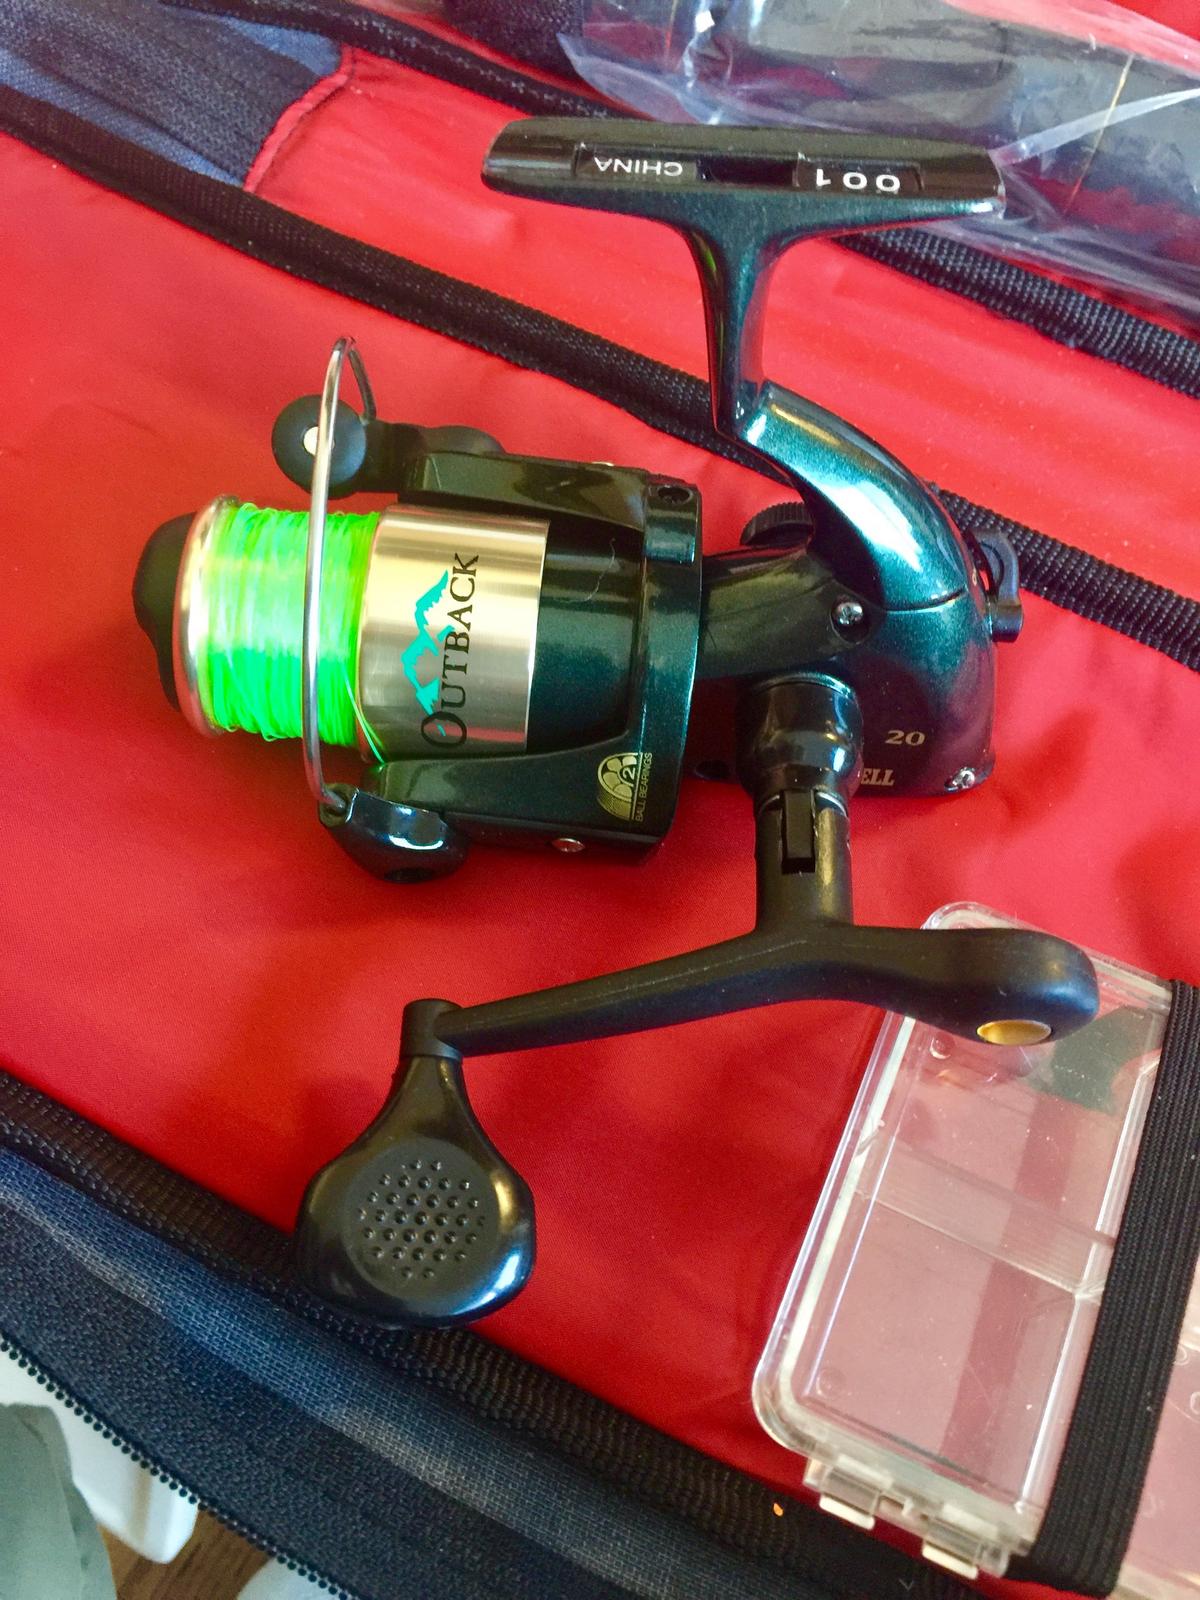 Mitchell,”Outback Pro 20” travel rod/reel/case